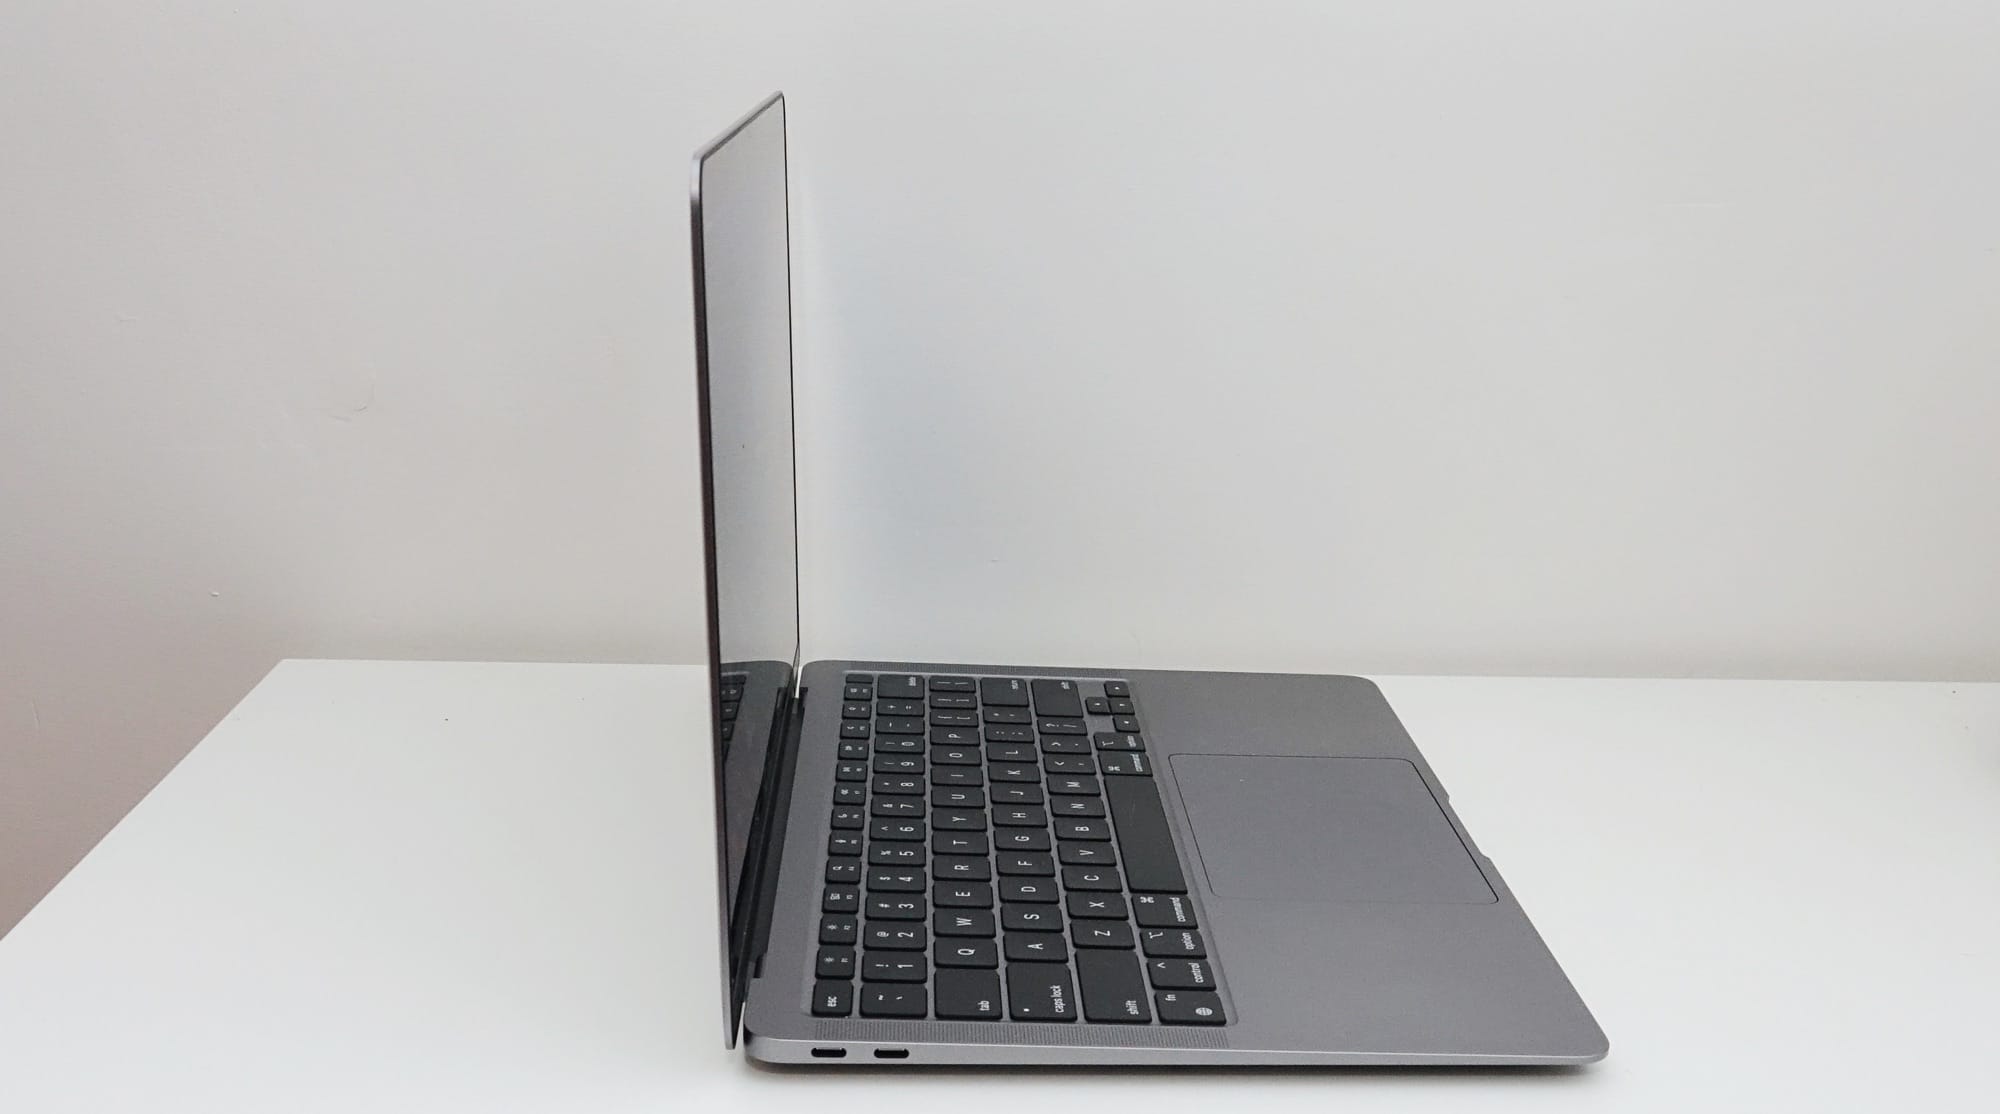 The side of the late-2020 MacBook Air